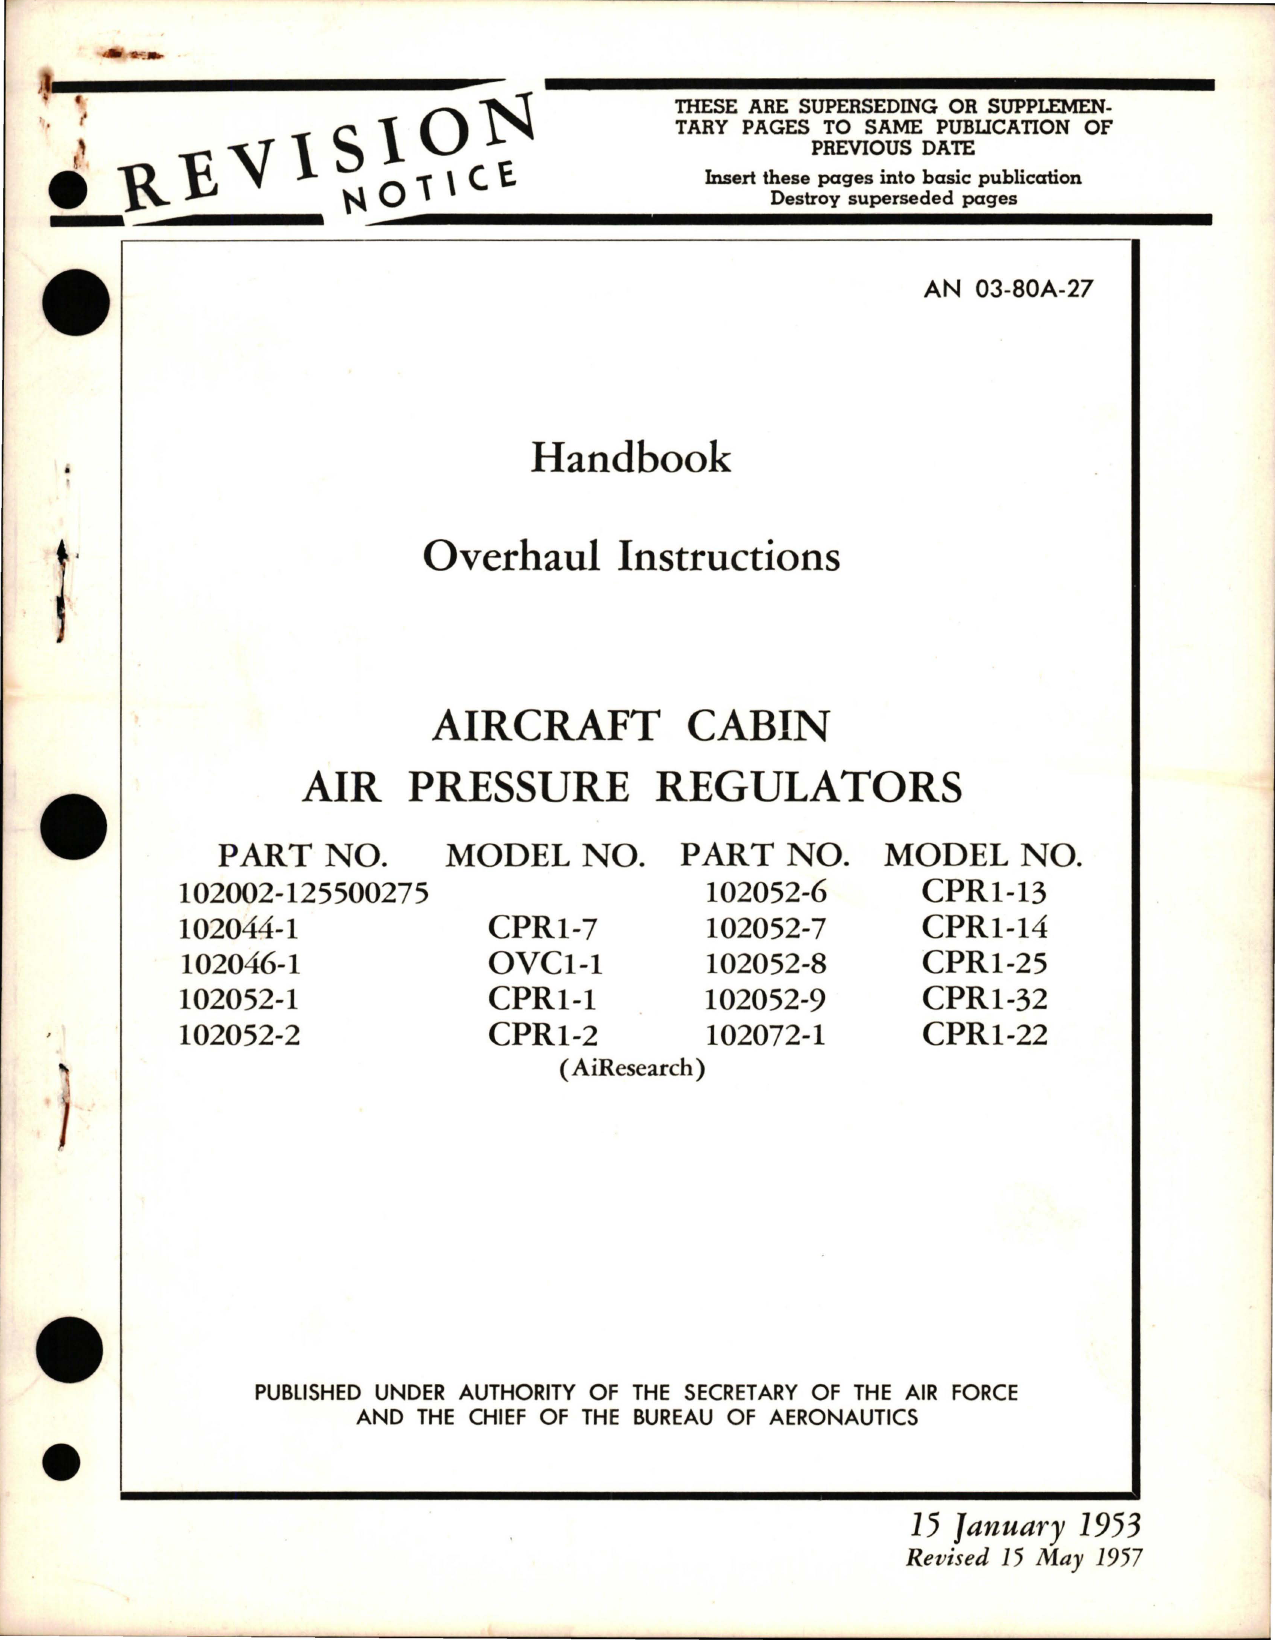 Sample page 1 from AirCorps Library document: Overhaul Instructions for Aircraft Cabin Air Pressure Regulators